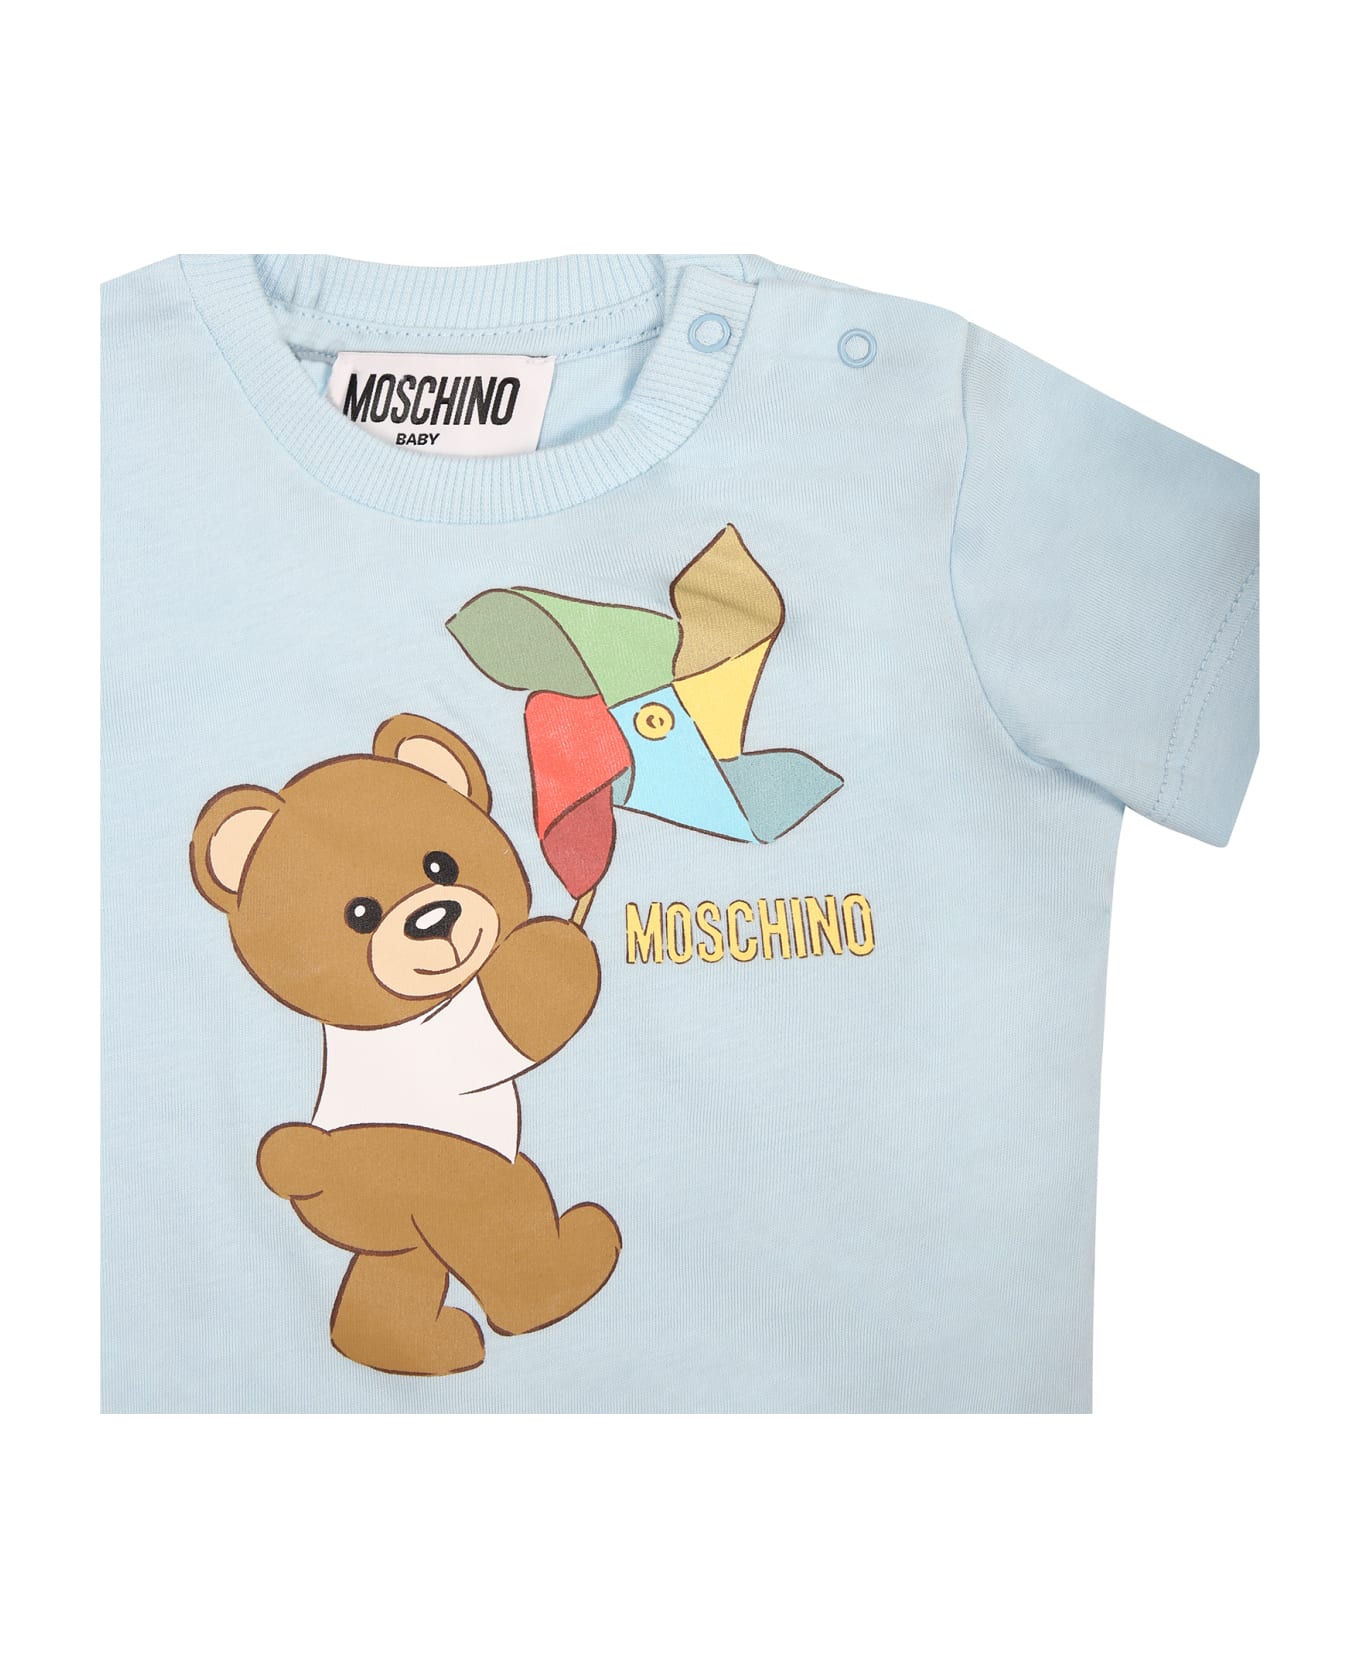 Moschino Light Blue Bodysuit For Baby Boy With Teddy Bear And Pinwheel - Light Blue